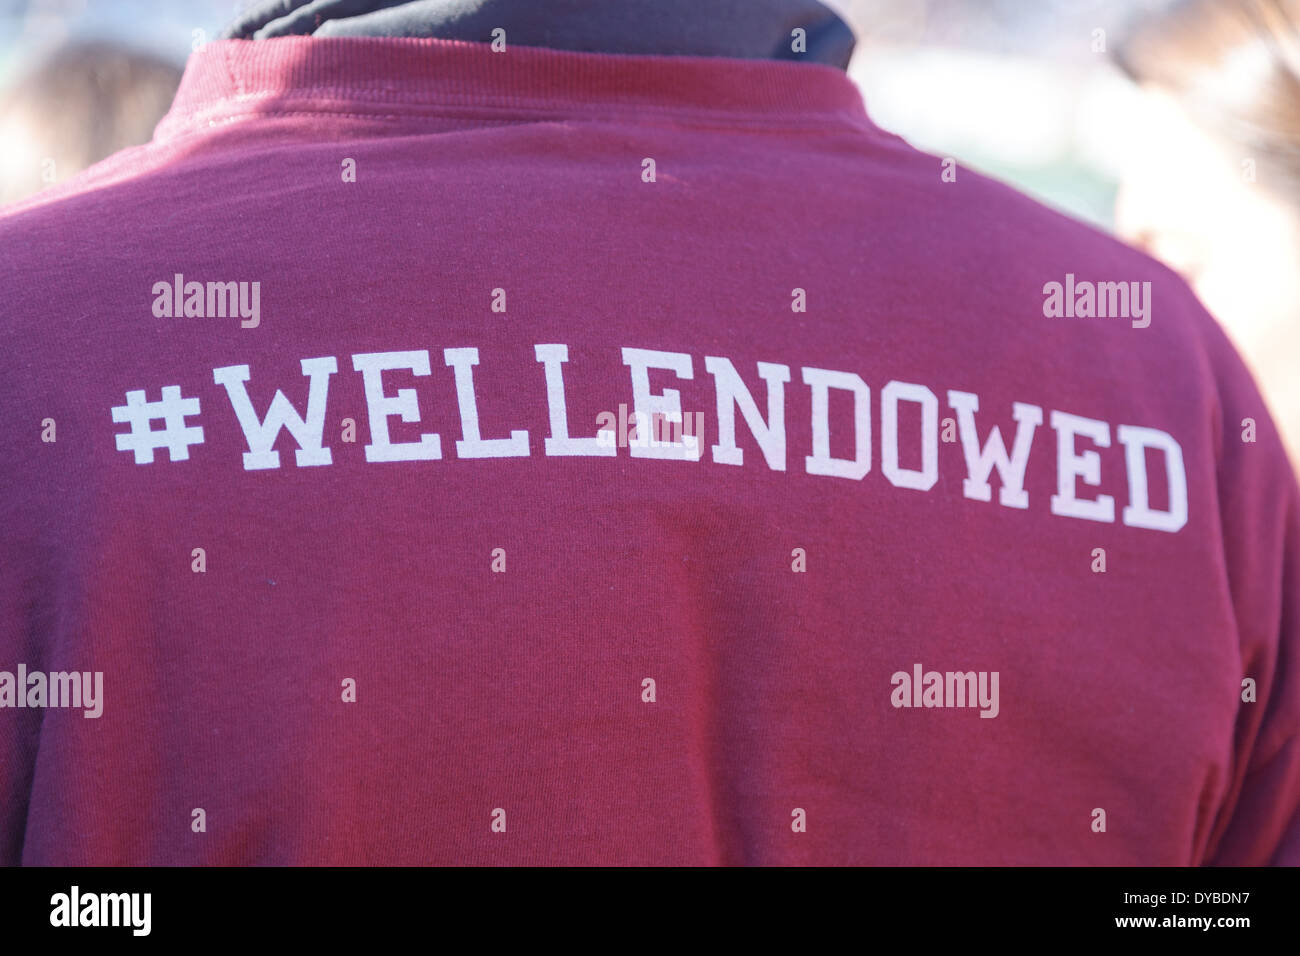 '#wellendowed', referencing Harvard's ample endowment, on the back of a sweater at a Harvard-Yale game in New Haven, CT in 2013. Stock Photo